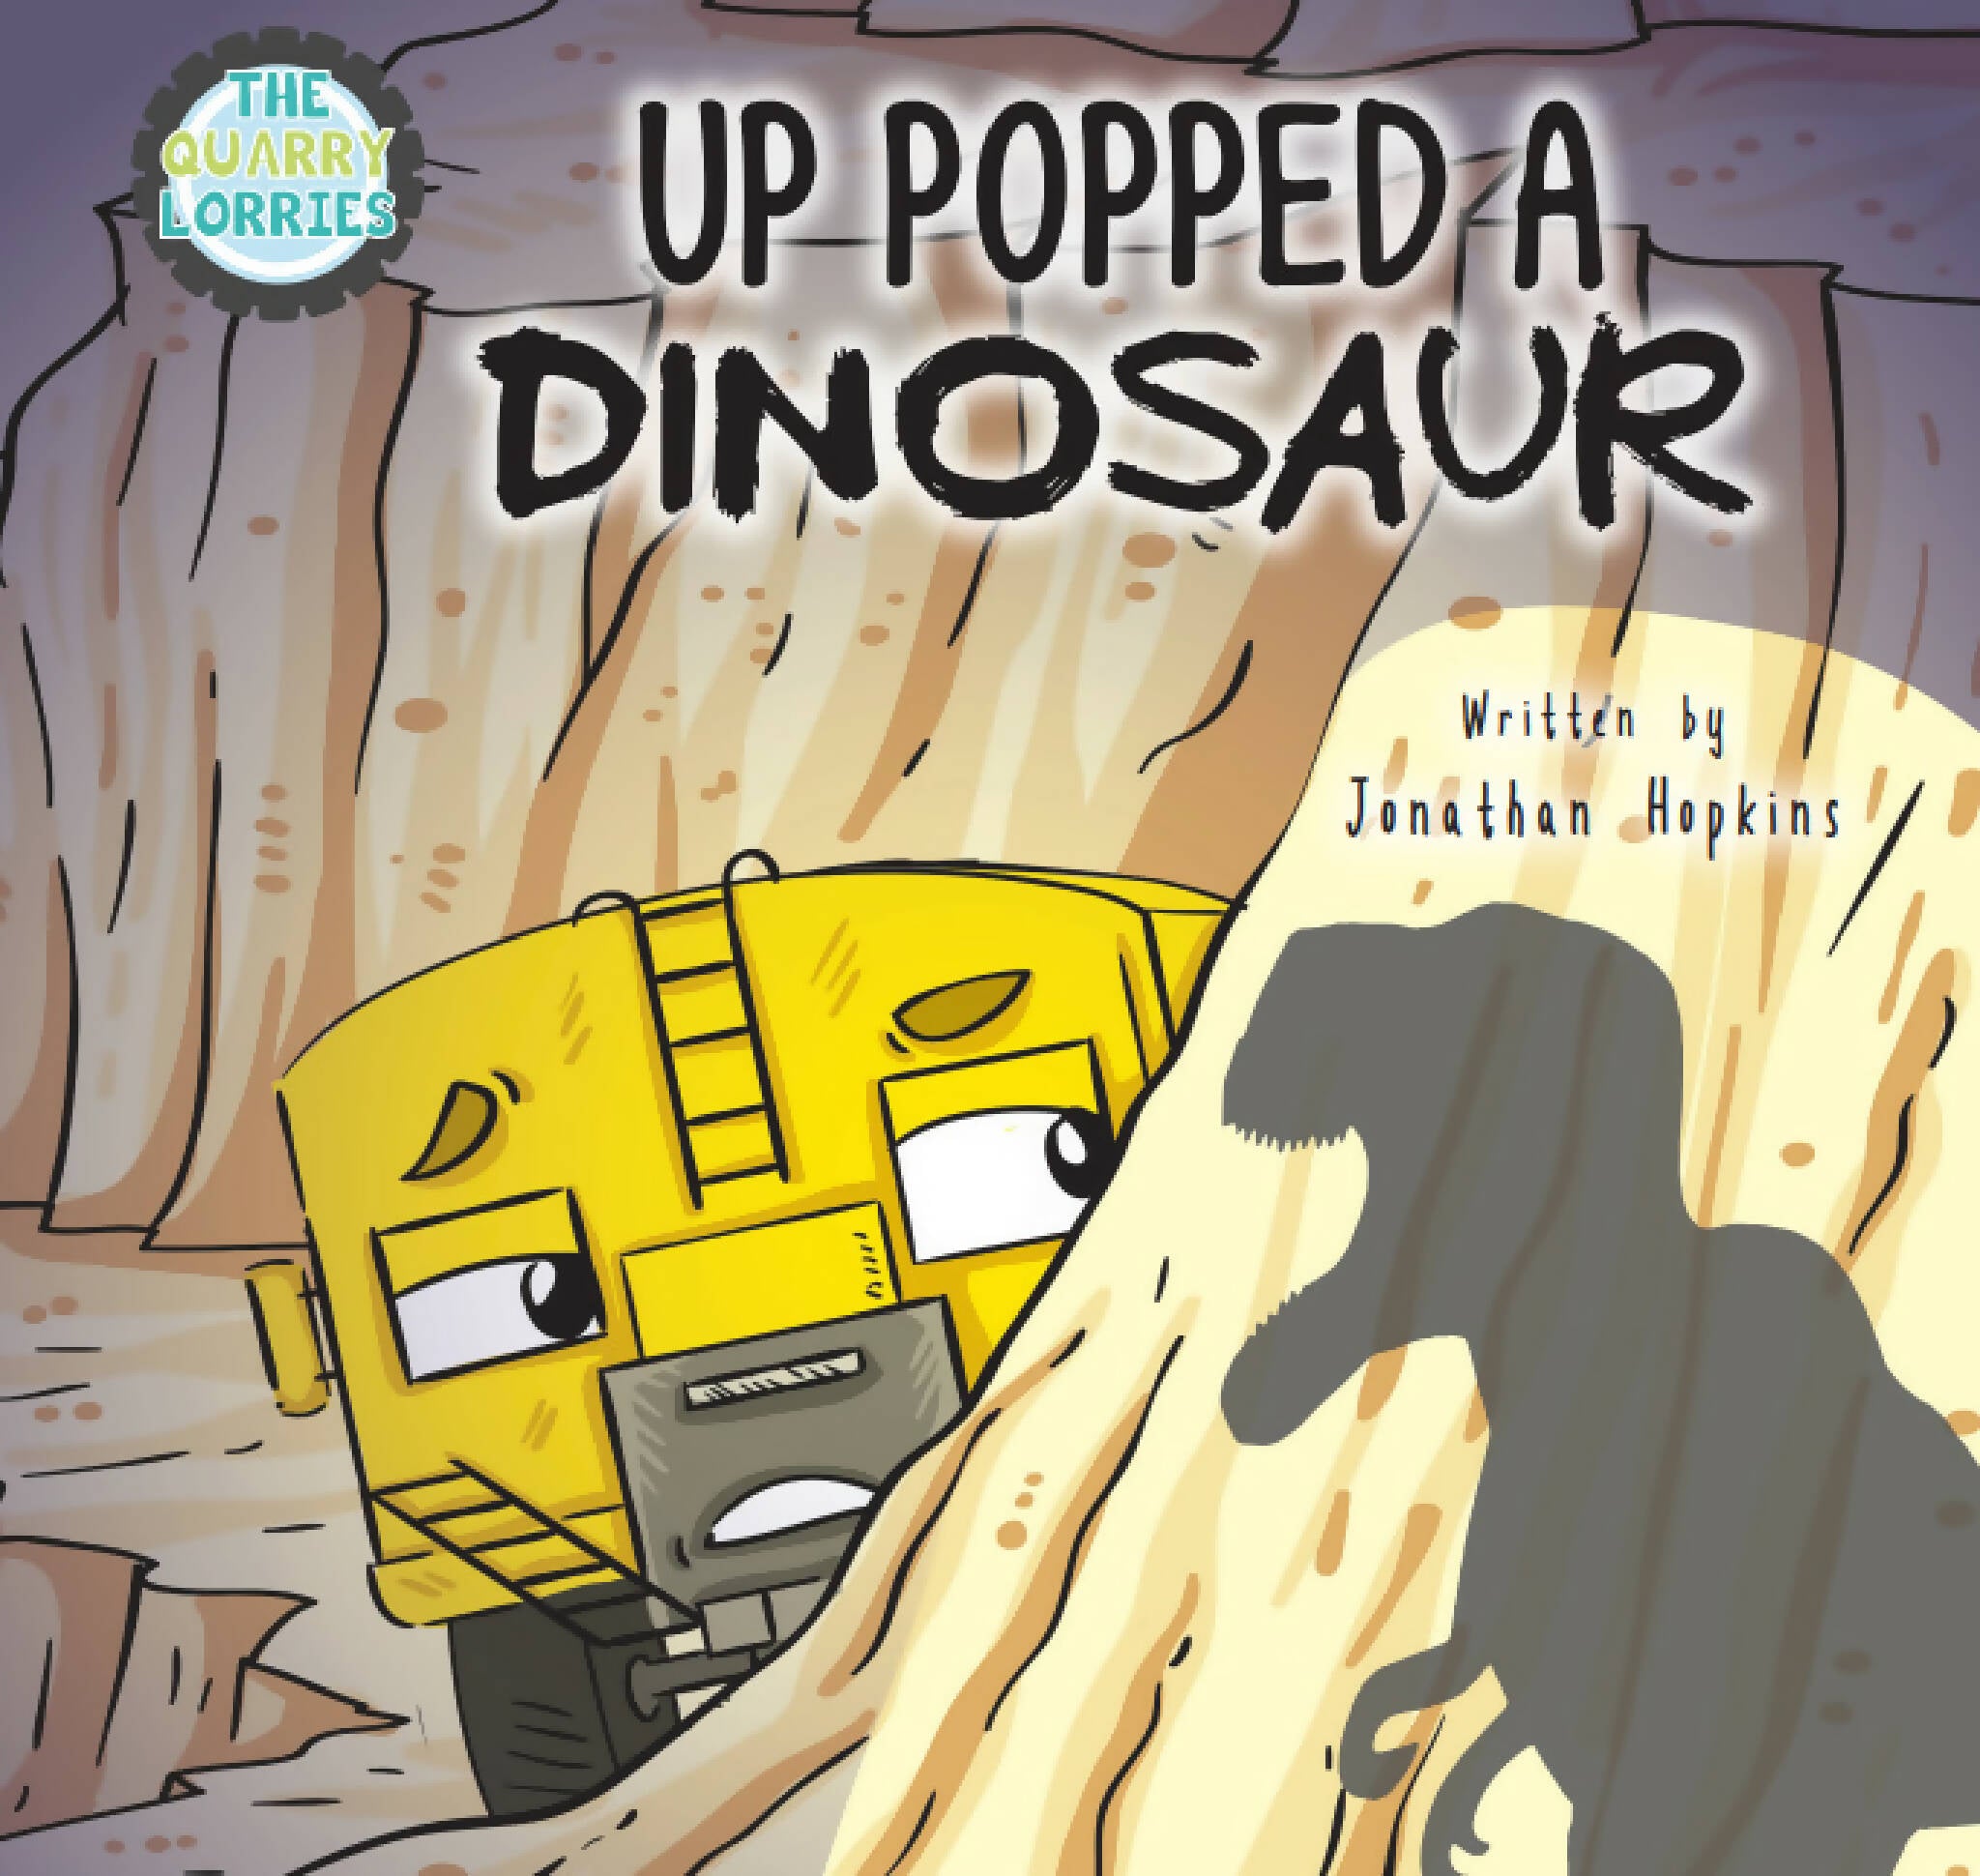 The Quarry Lorries: Up Popped a Dinosaur